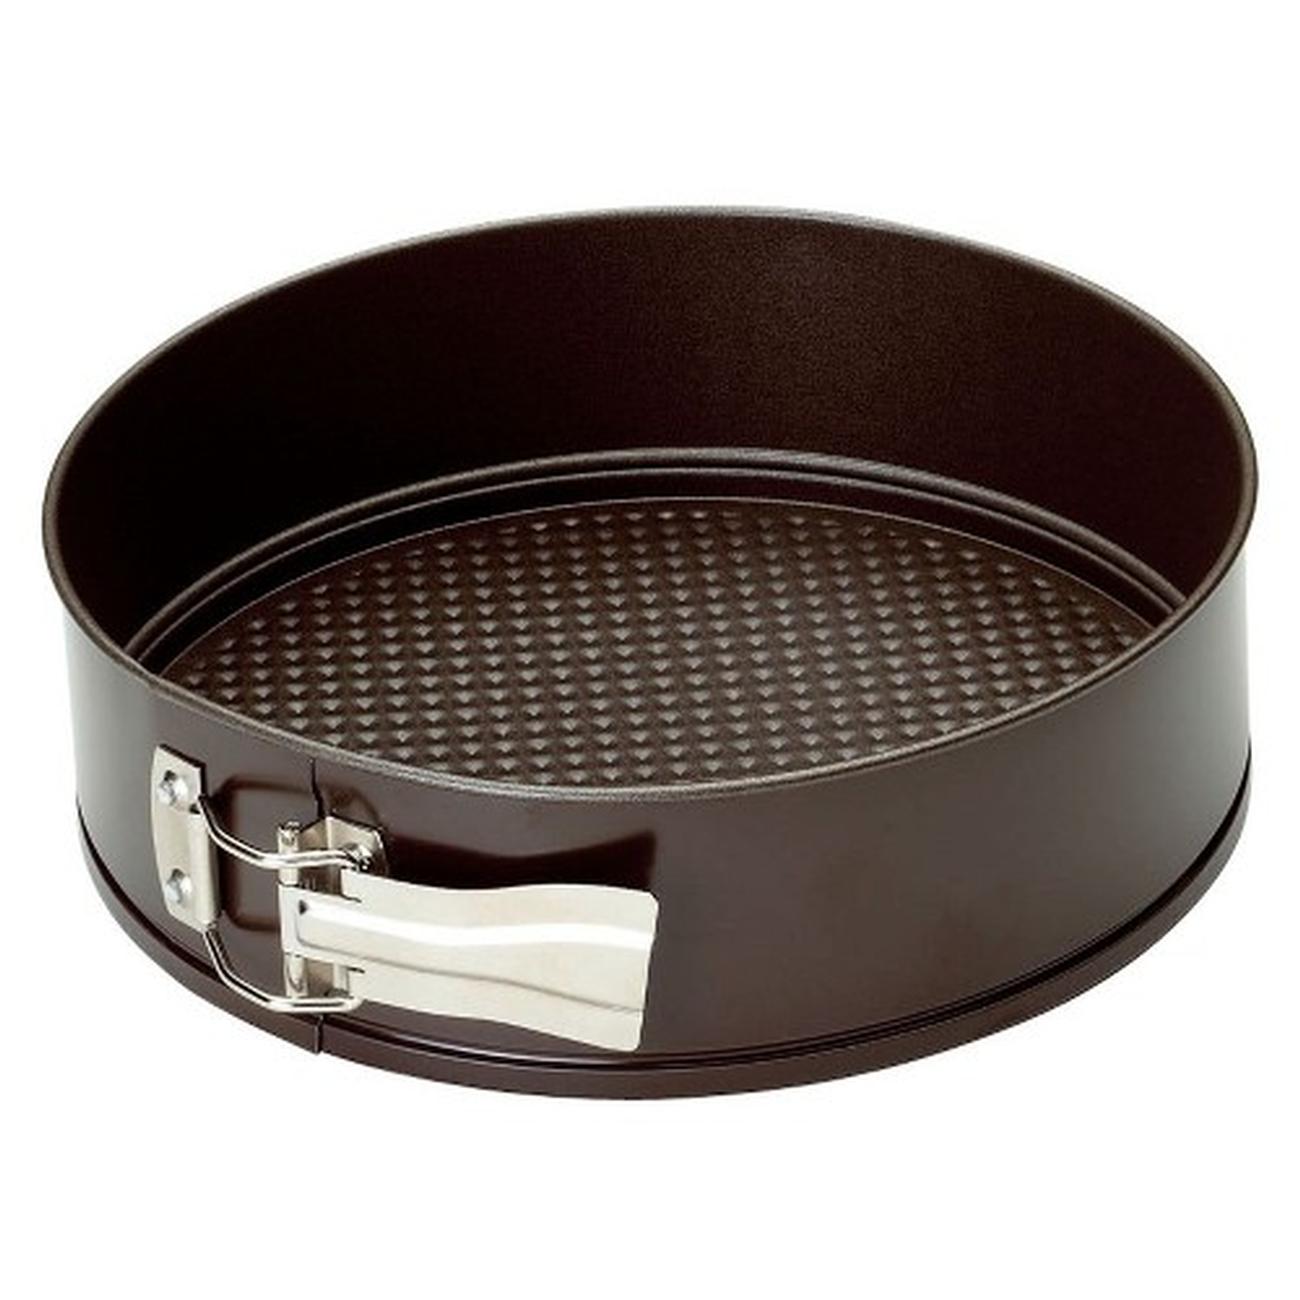 Wilton Round Cake Pan, Even-Heating for Perfect Results Every Time, Du –  daniellewalkerenterprises